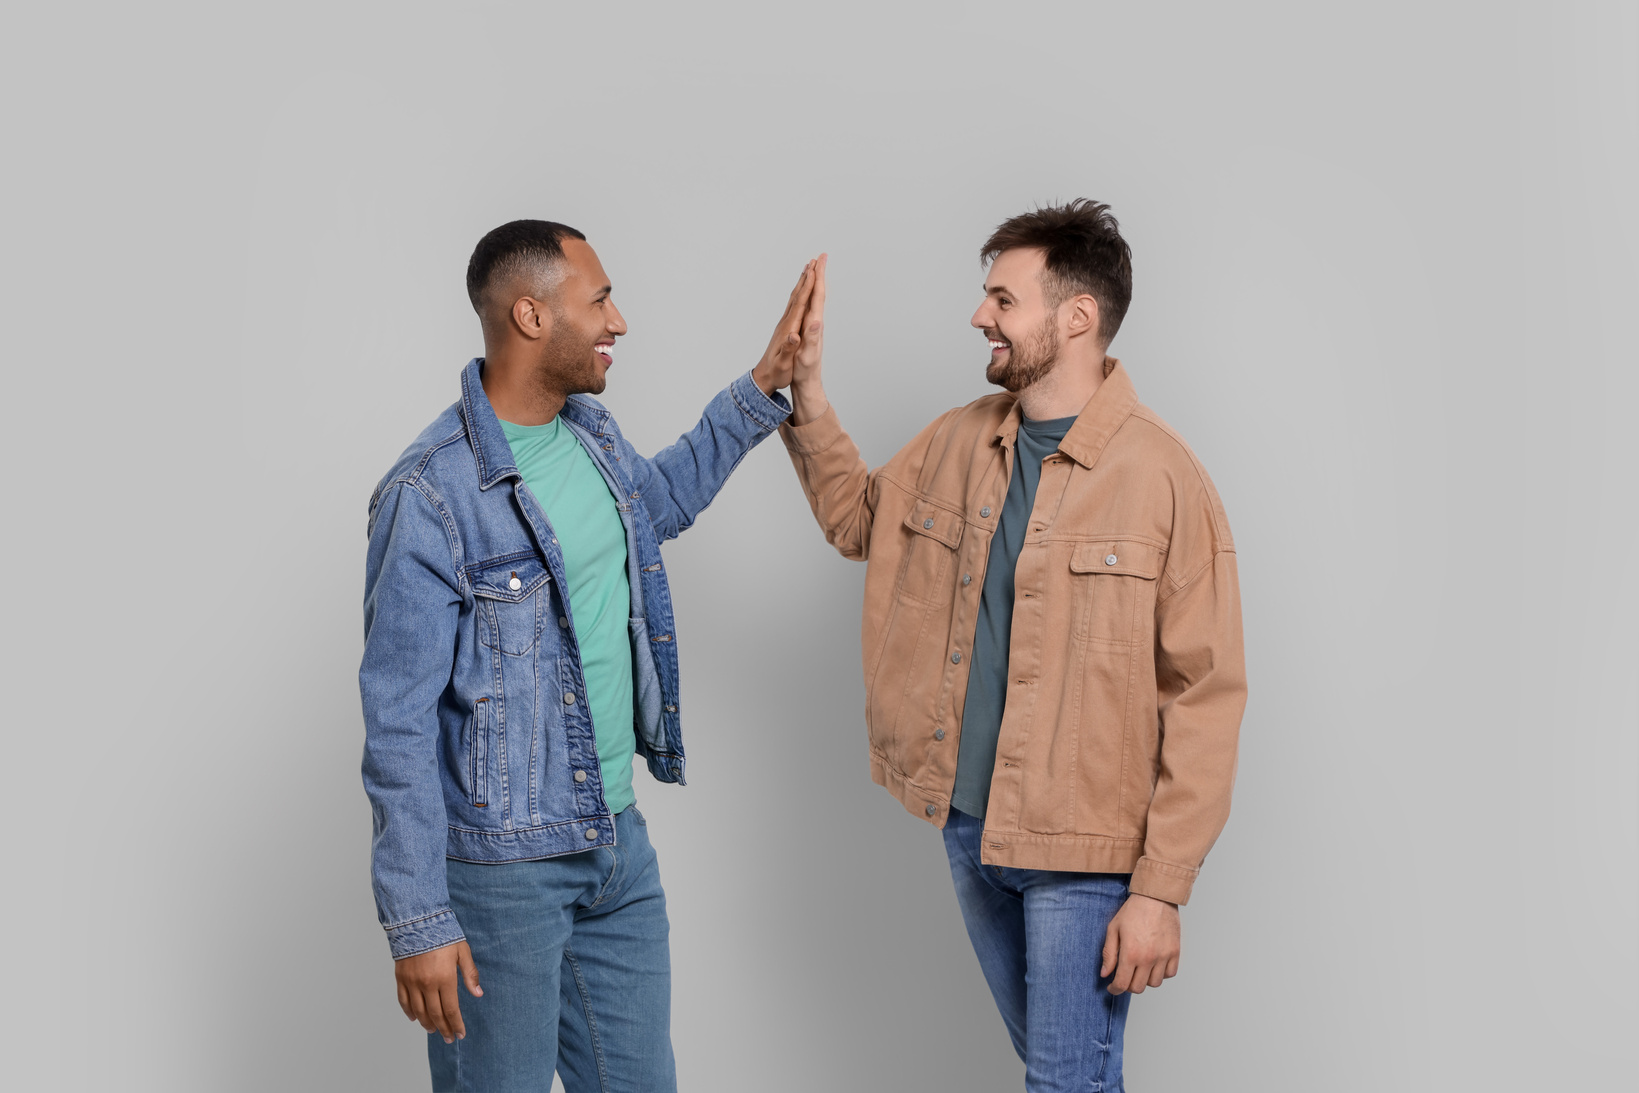 Men Giving High Five on Grey Background